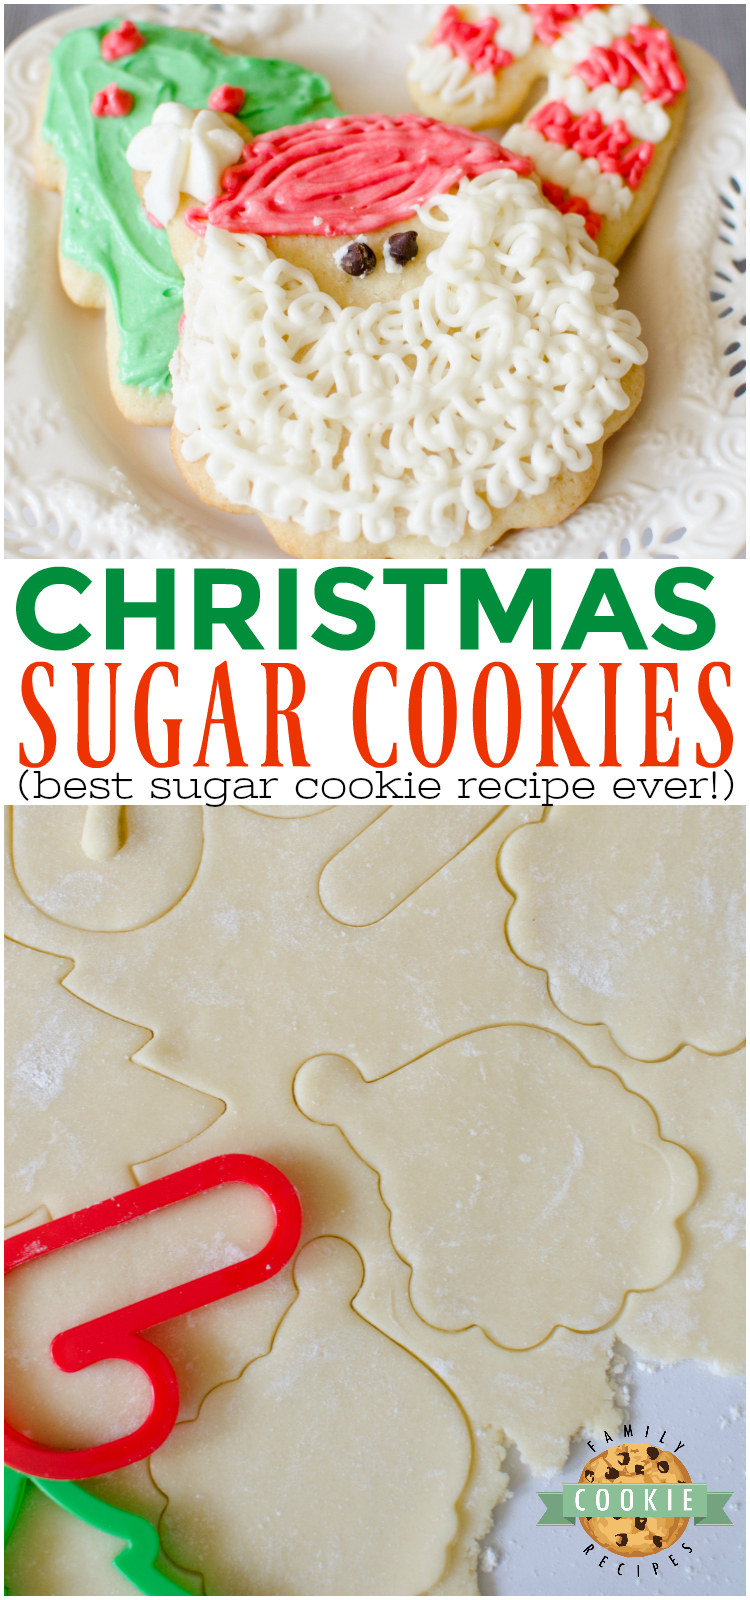 Christmas Sugar Cookies are a necessary holiday tradition at our house! This simple sugar cookie recipe produces soft, chewy and delicious cut-out cookies that can be decorated with a simple 4-ingredient buttercream frosting. via @buttergirls